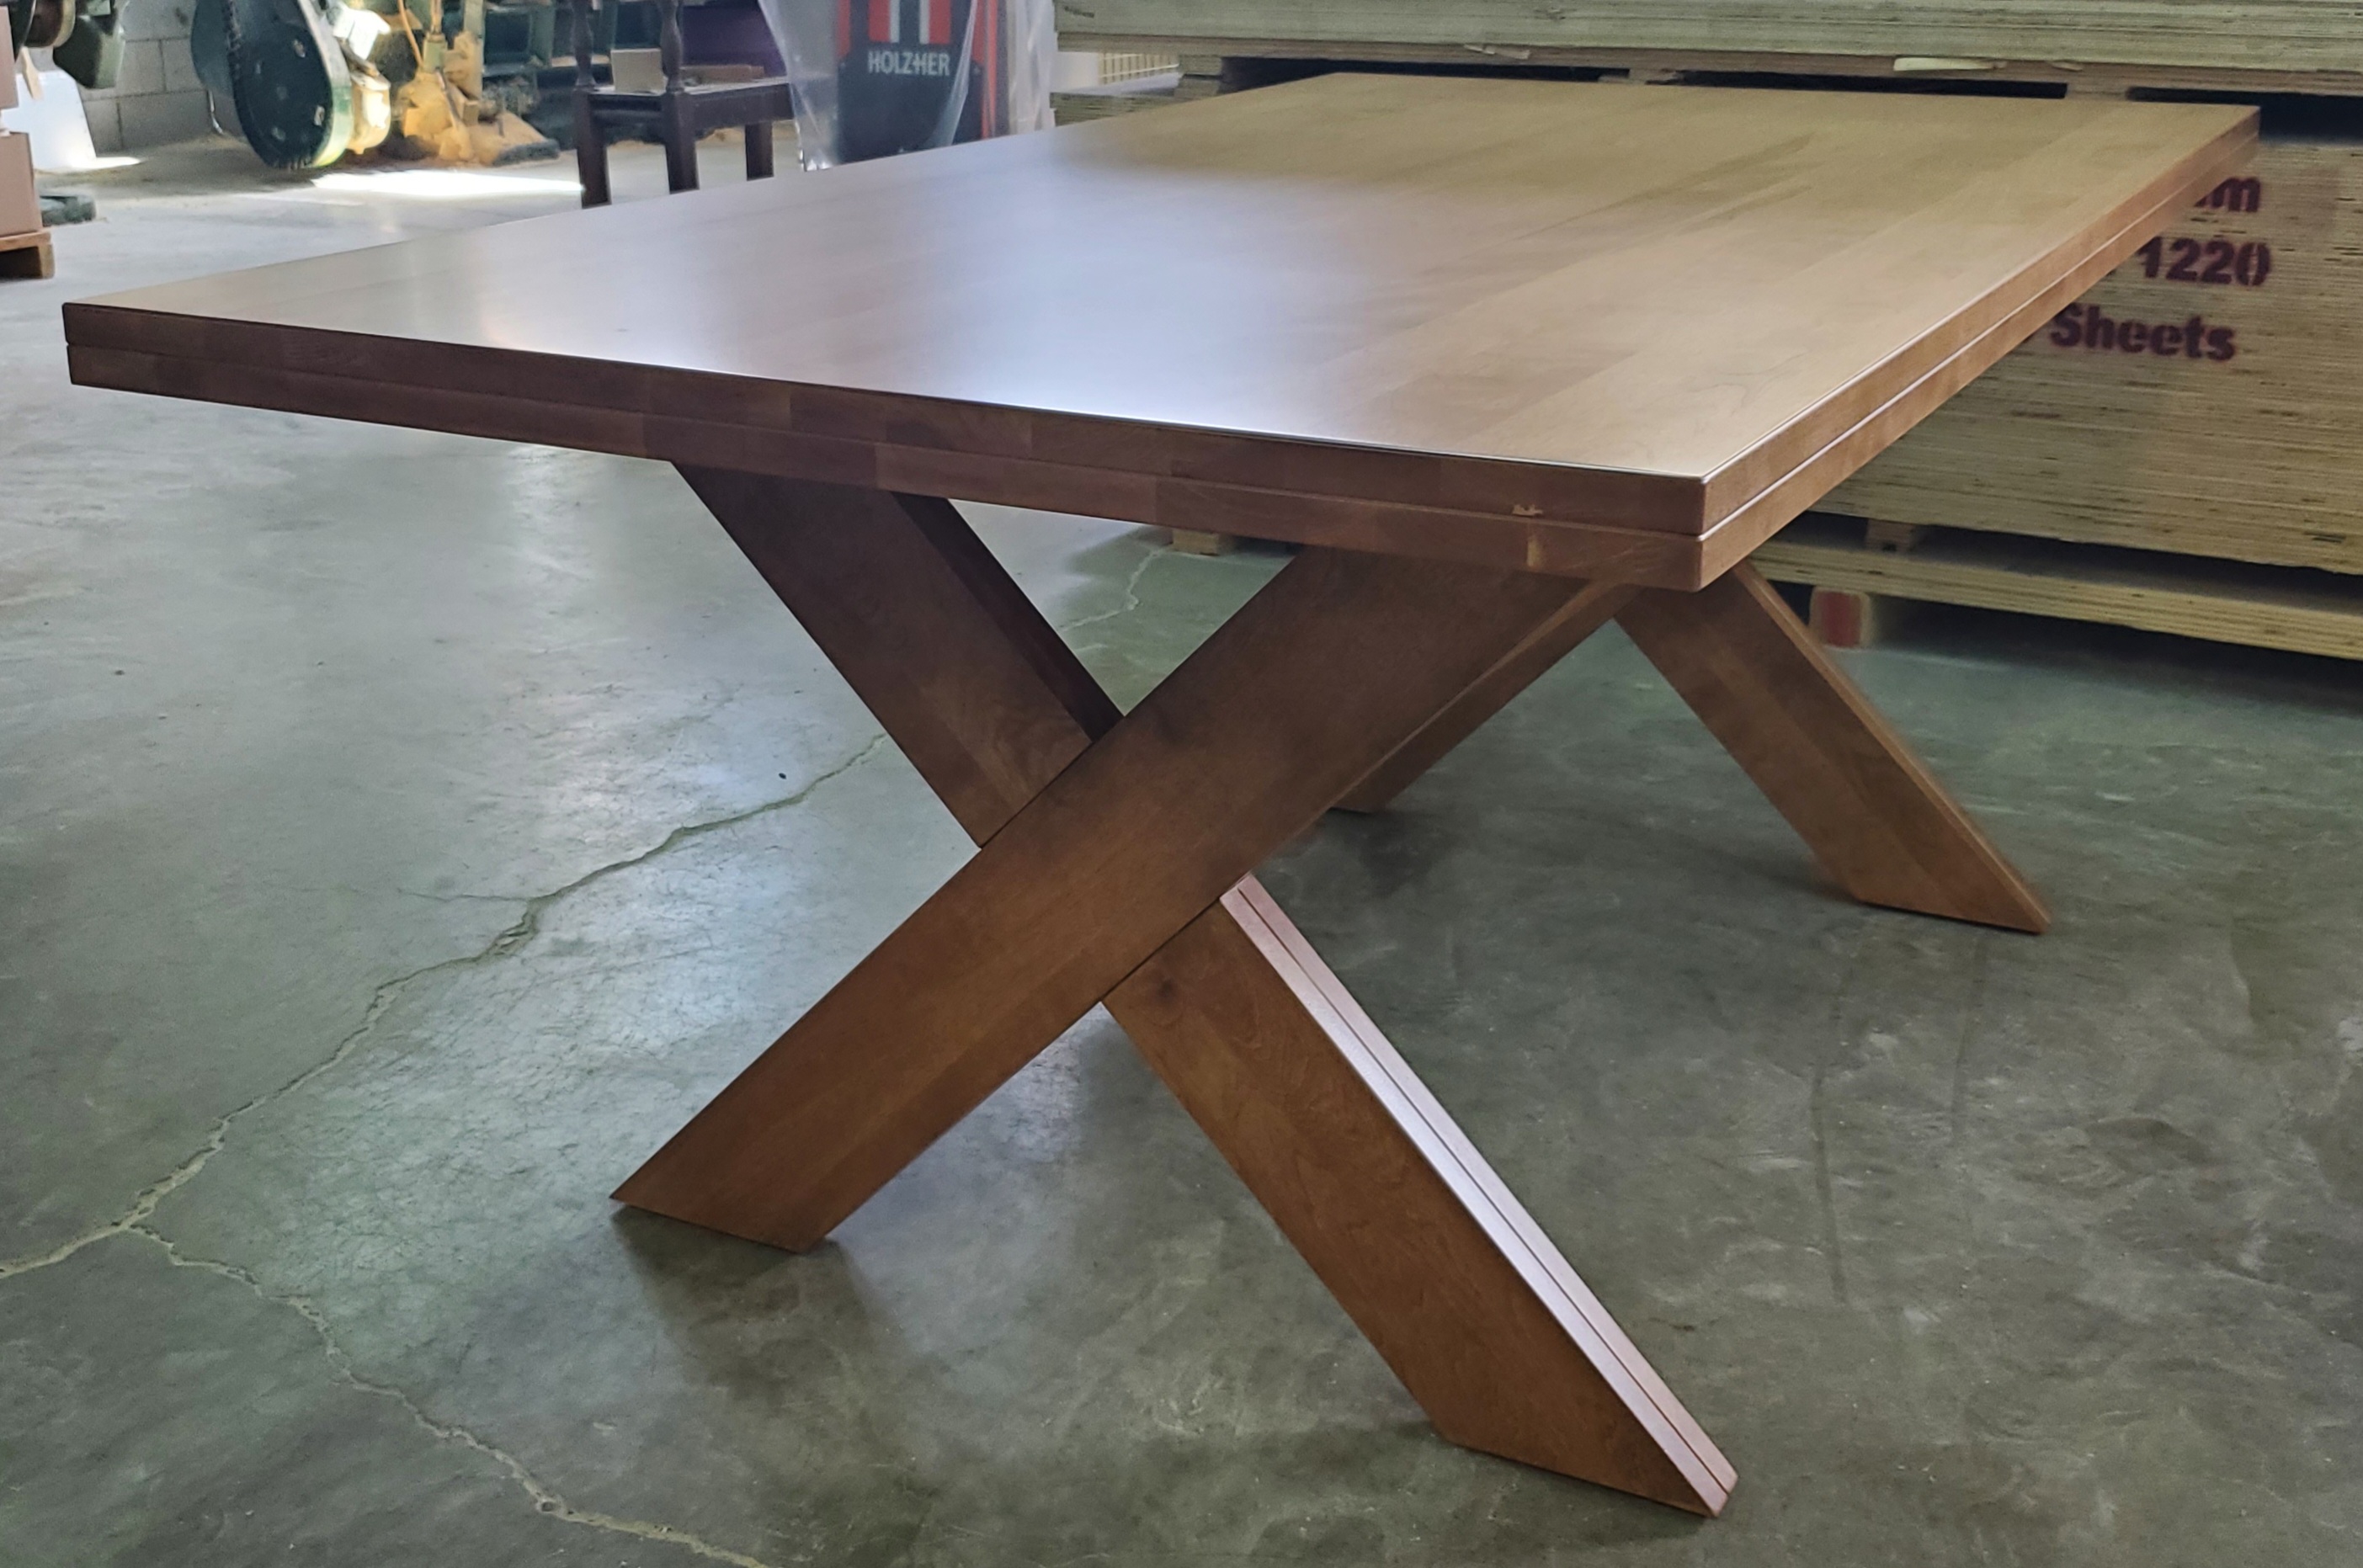 built up table top with 3800 xavier double base